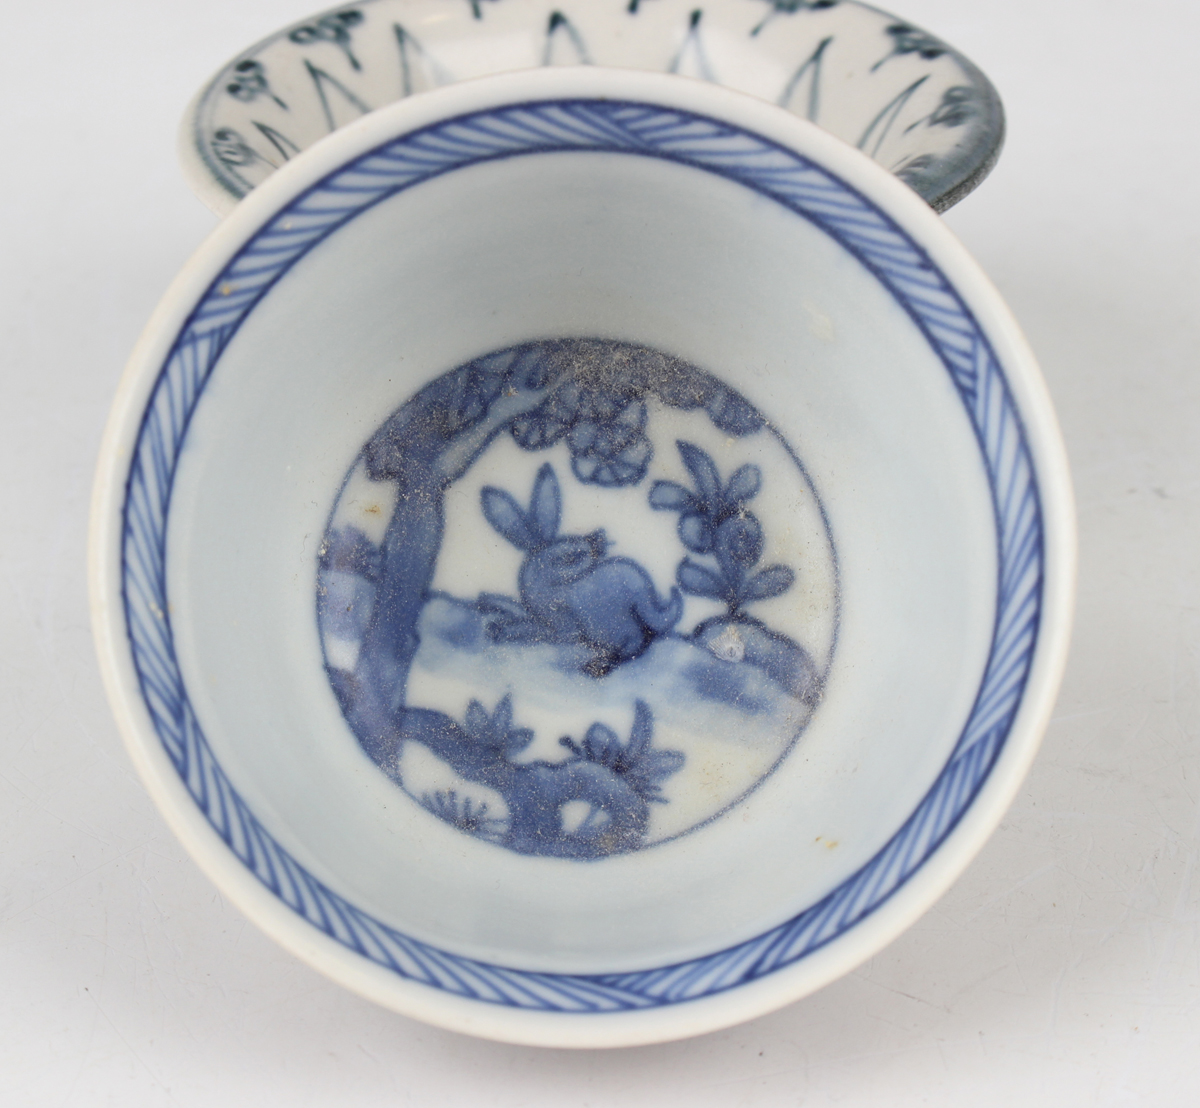 A Chinese Ca Mau shipwreck blue and white Batavian export porcelain teabowl, circa 1730, the - Image 13 of 13